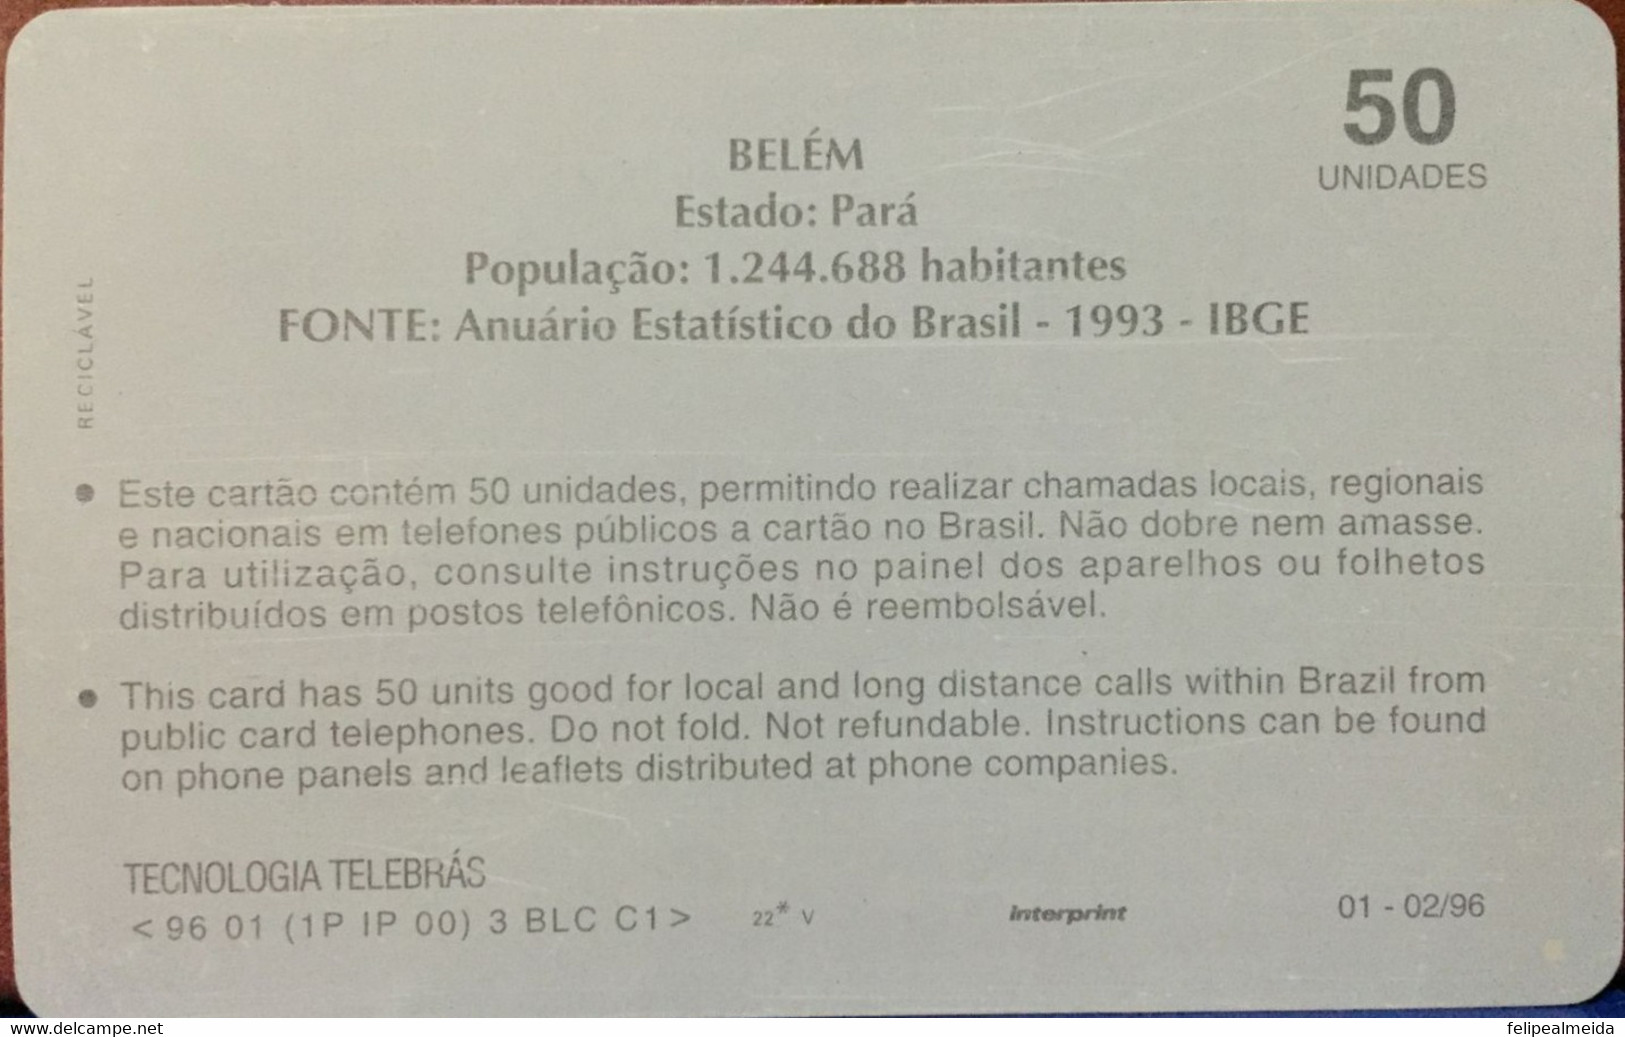 Phone Card Manufactured By Telebras In 1996 - Photo Belem Do Pará - Pará - Brazil - Statistical Yearbook Of Brazil 1993 - Cultural